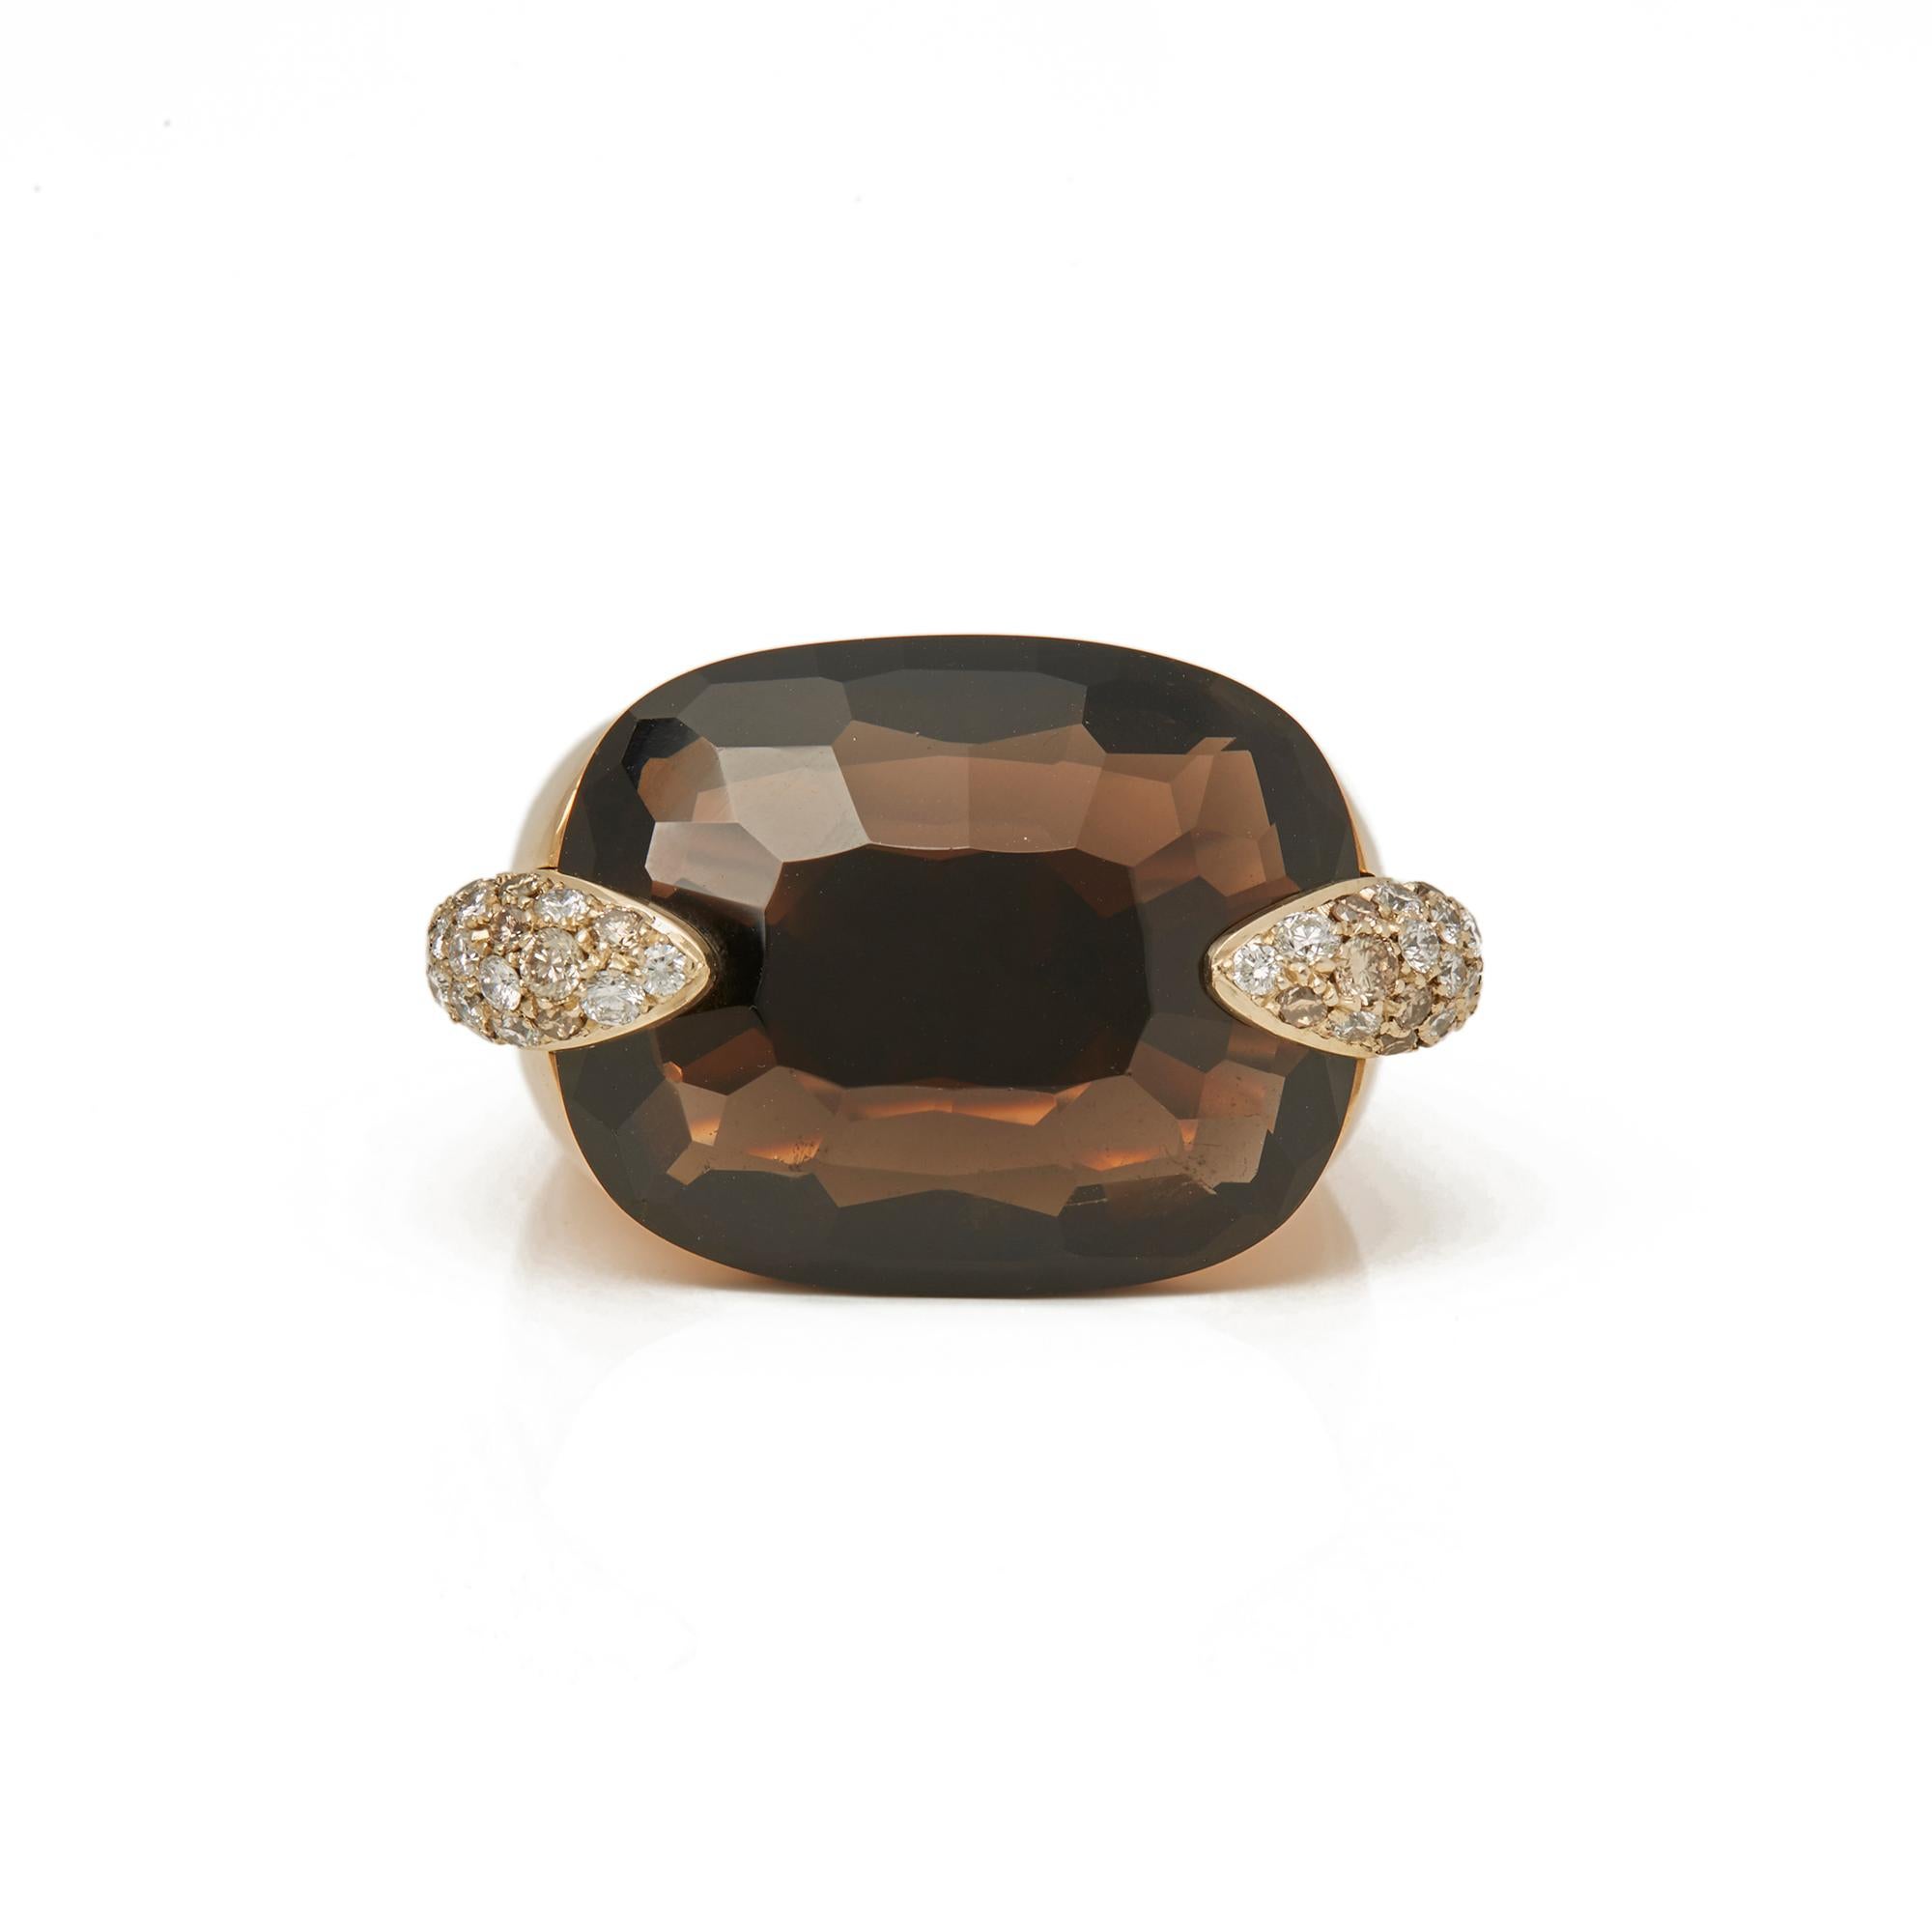 Code: COM2099
Brand: Pomellato
Description: 18k Yellow Gold Smoky Quartz & Diamond Cocktail Ring
Accompanied With: Presentation Box
Gender: Ladies
UK Ring Size: M
EU Ring Size: 52
US Ring Size: 6 1/4
Resizing Possible?: YES
Band Width: